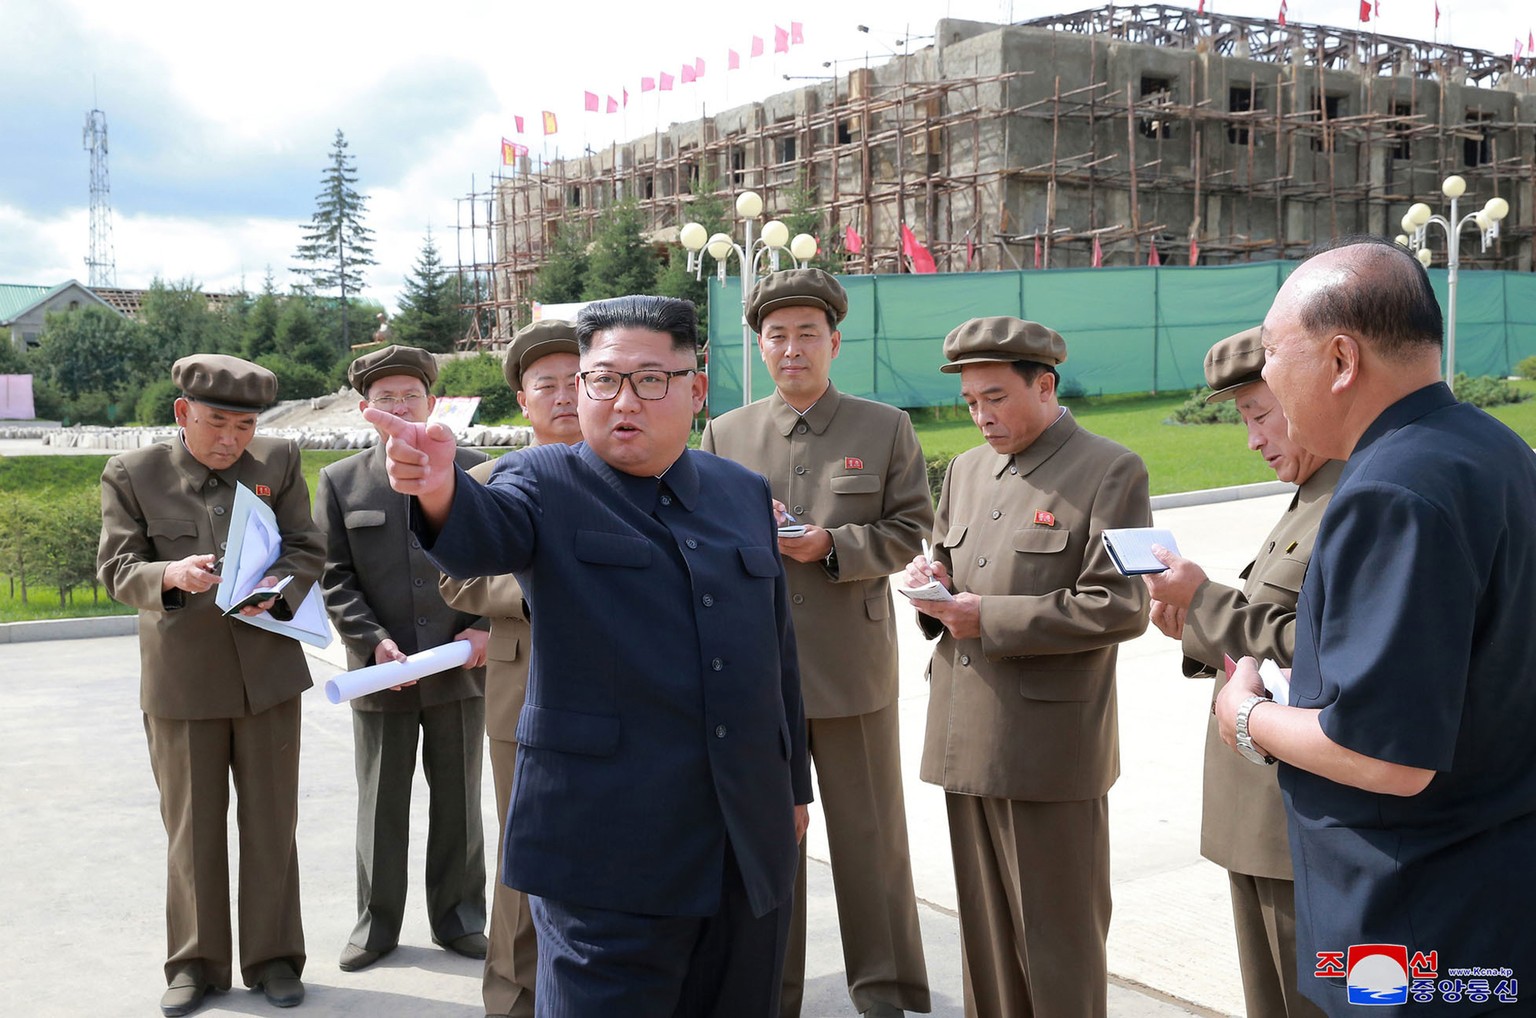 In this undated photo, provided on Aug. 19, 2018, by the North Korean government, North Korean leader Kim Jong Un, center, visits a construction site during a visit to the city of Samjiyon, a remote n ...